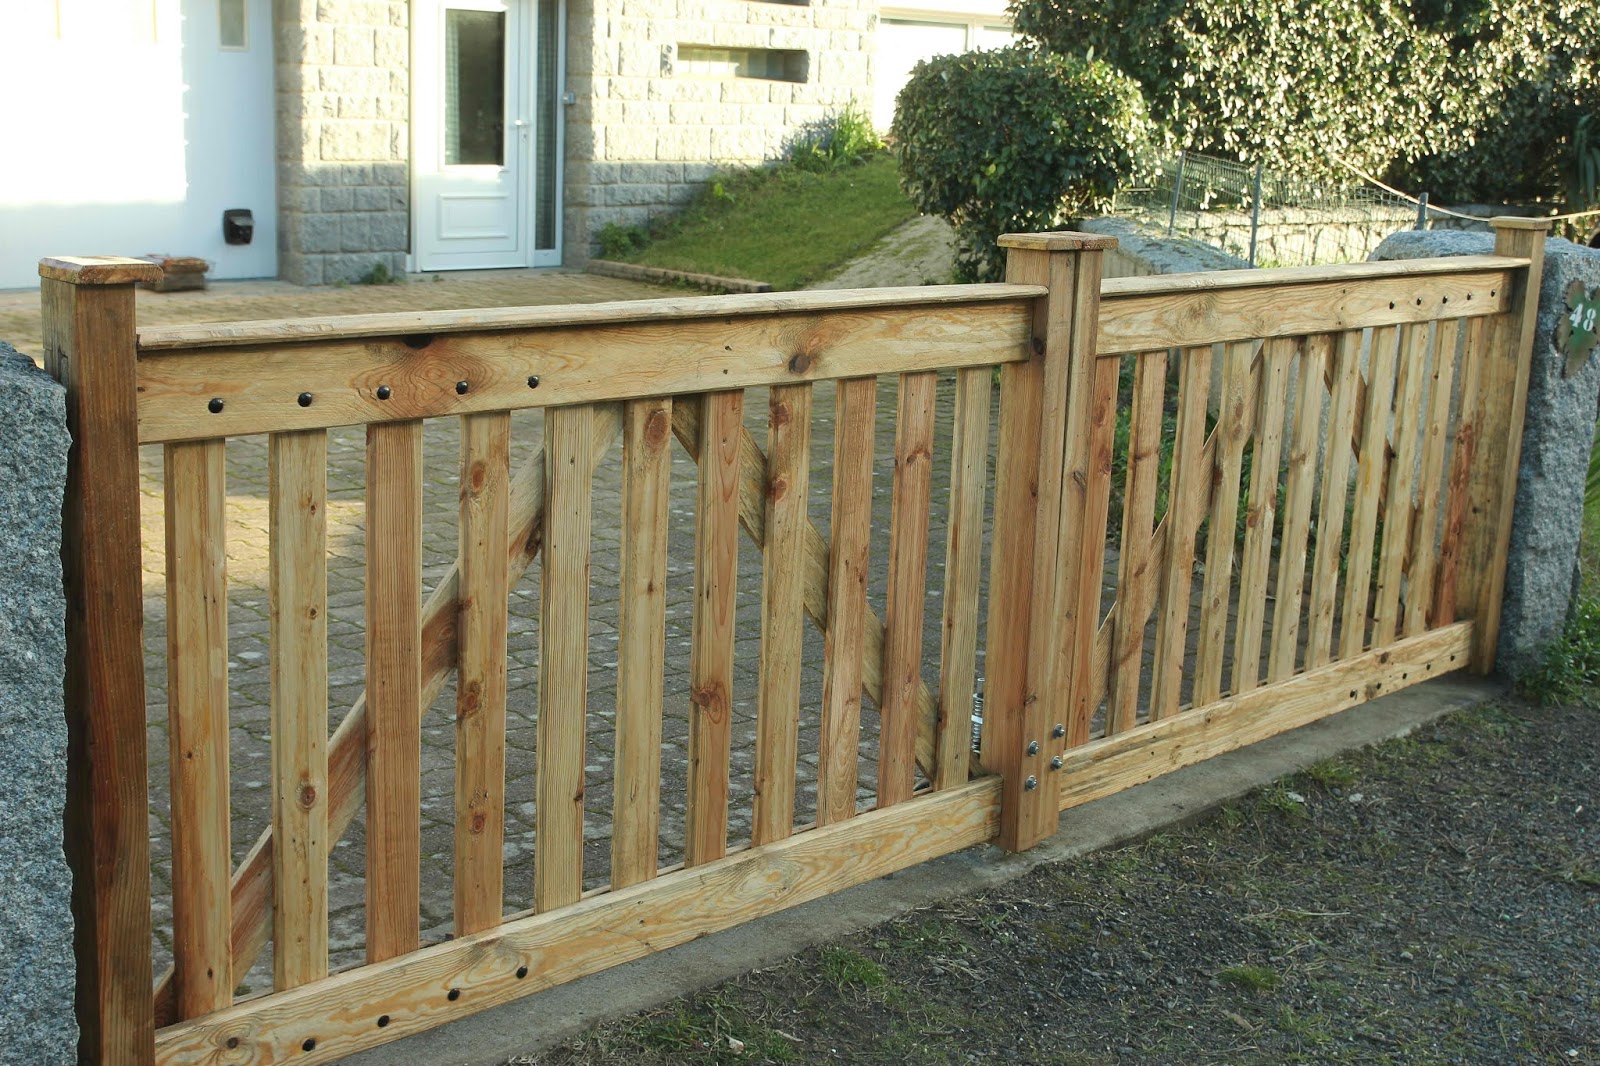 The Green Lever - Using minimal resources for maximum quality of life: Pallet Wood Driveway Gates Detailed Step-by-Step Design & Construction